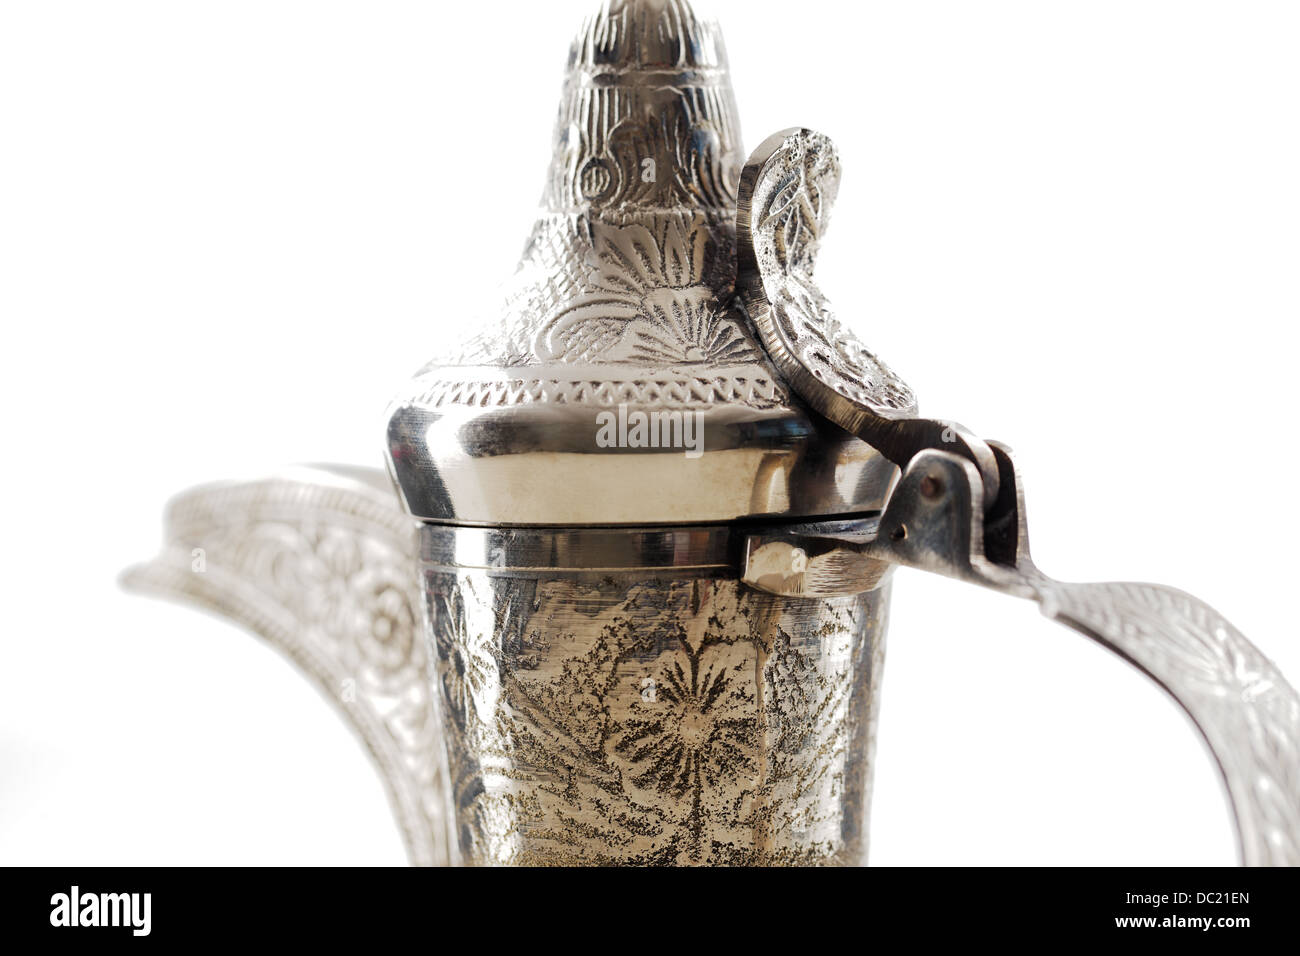 An ornate dallah which is a metal pot with a long spout designed specifically for making Arabic coffee Stock Photo